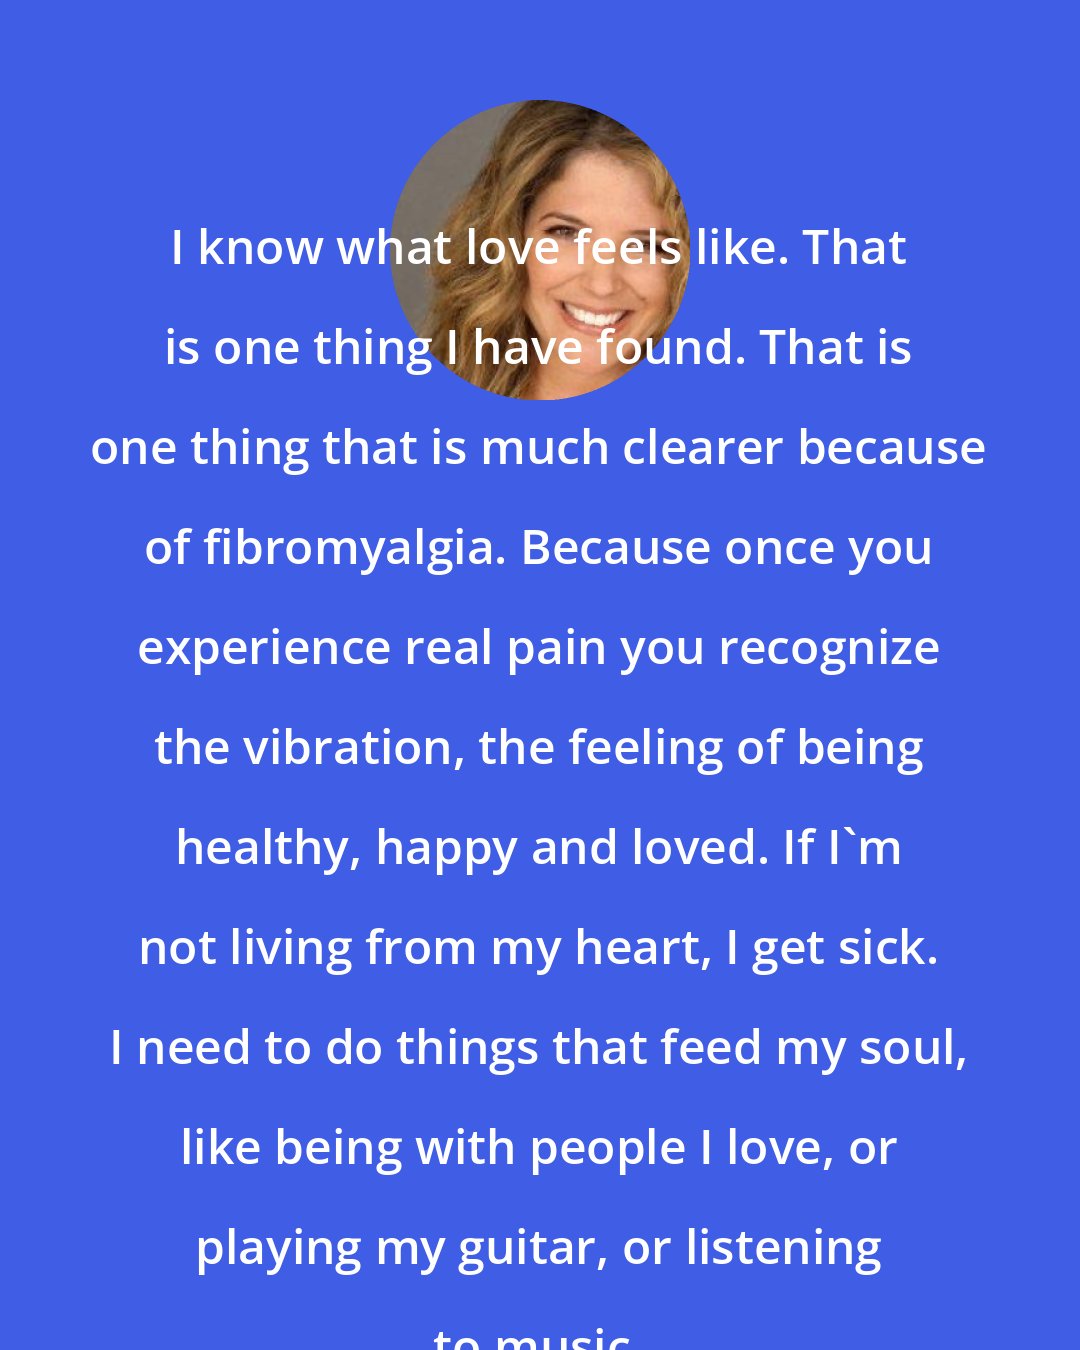 A. J. Langer: I know what love feels like. That is one thing I have found. That is one thing that is much clearer because of fibromyalgia. Because once you experience real pain you recognize the vibration, the feeling of being healthy, happy and loved. If I'm not living from my heart, I get sick. I need to do things that feed my soul, like being with people I love, or playing my guitar, or listening to music.